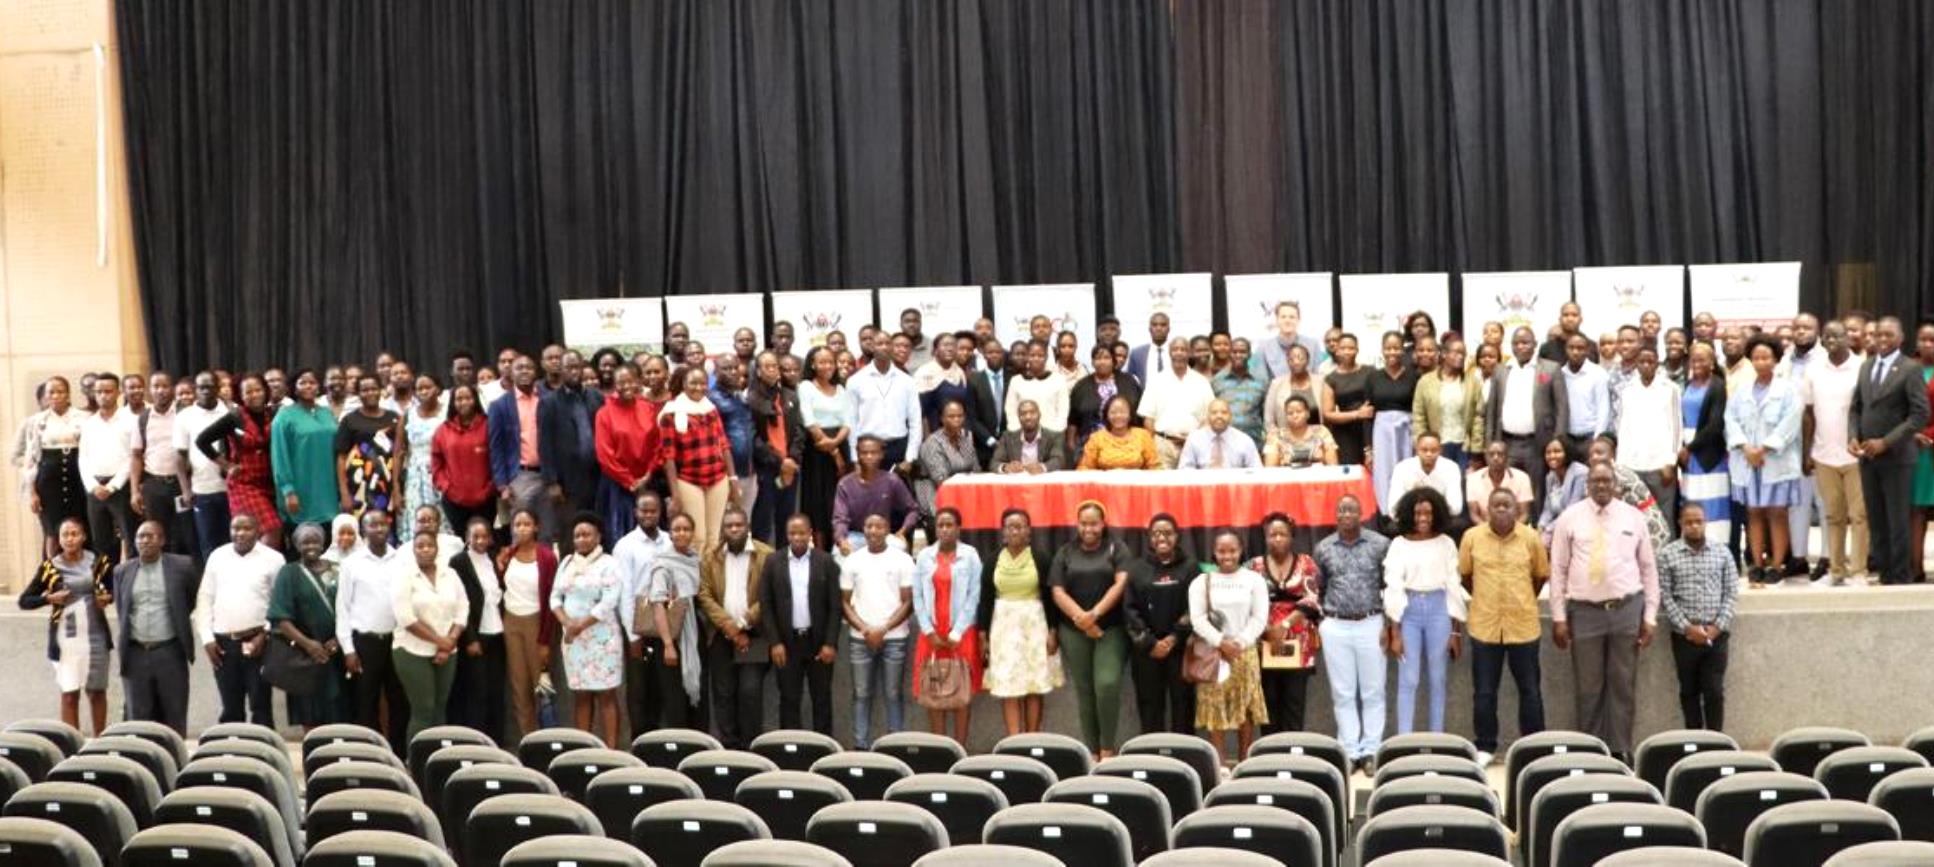 Graduate Students from the College of Humanities and Social Sciences (CHUSS) and officials pose for a group photo during the Orientation Ceremony on 25th August 2023. Yusuf Lule Auditorium, Makerere University, Kampala Uganda. East Africa.